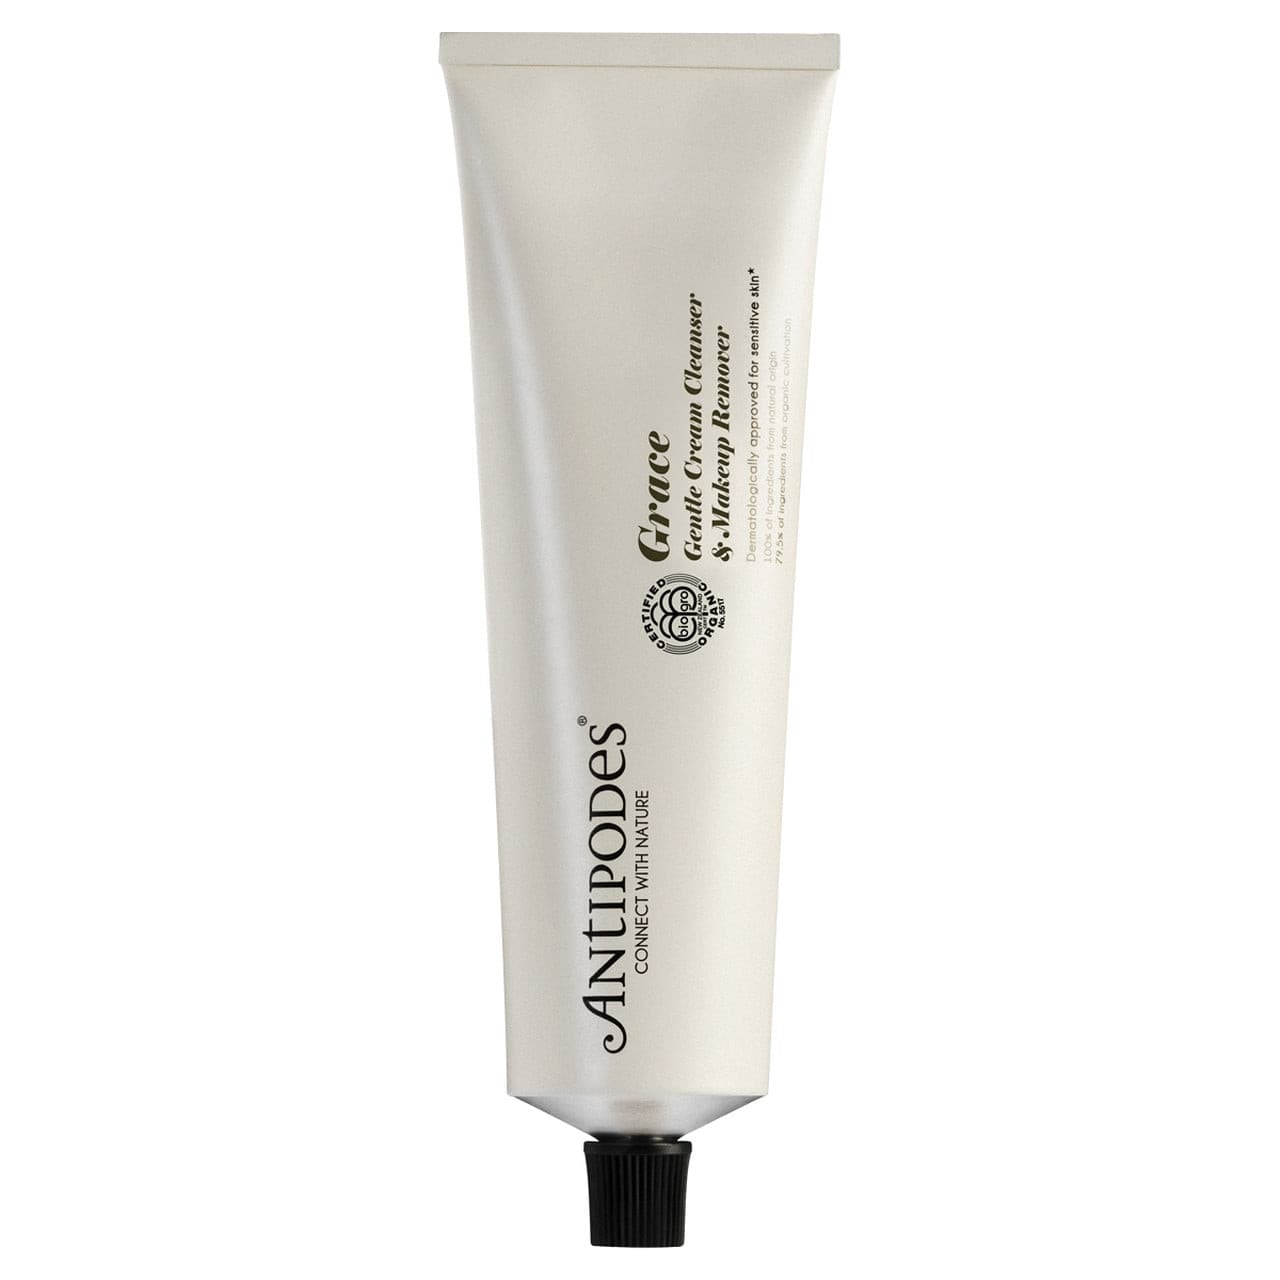 Antipodes Grace Gentle Cream Cleanser & Makeup Remover 120ml.